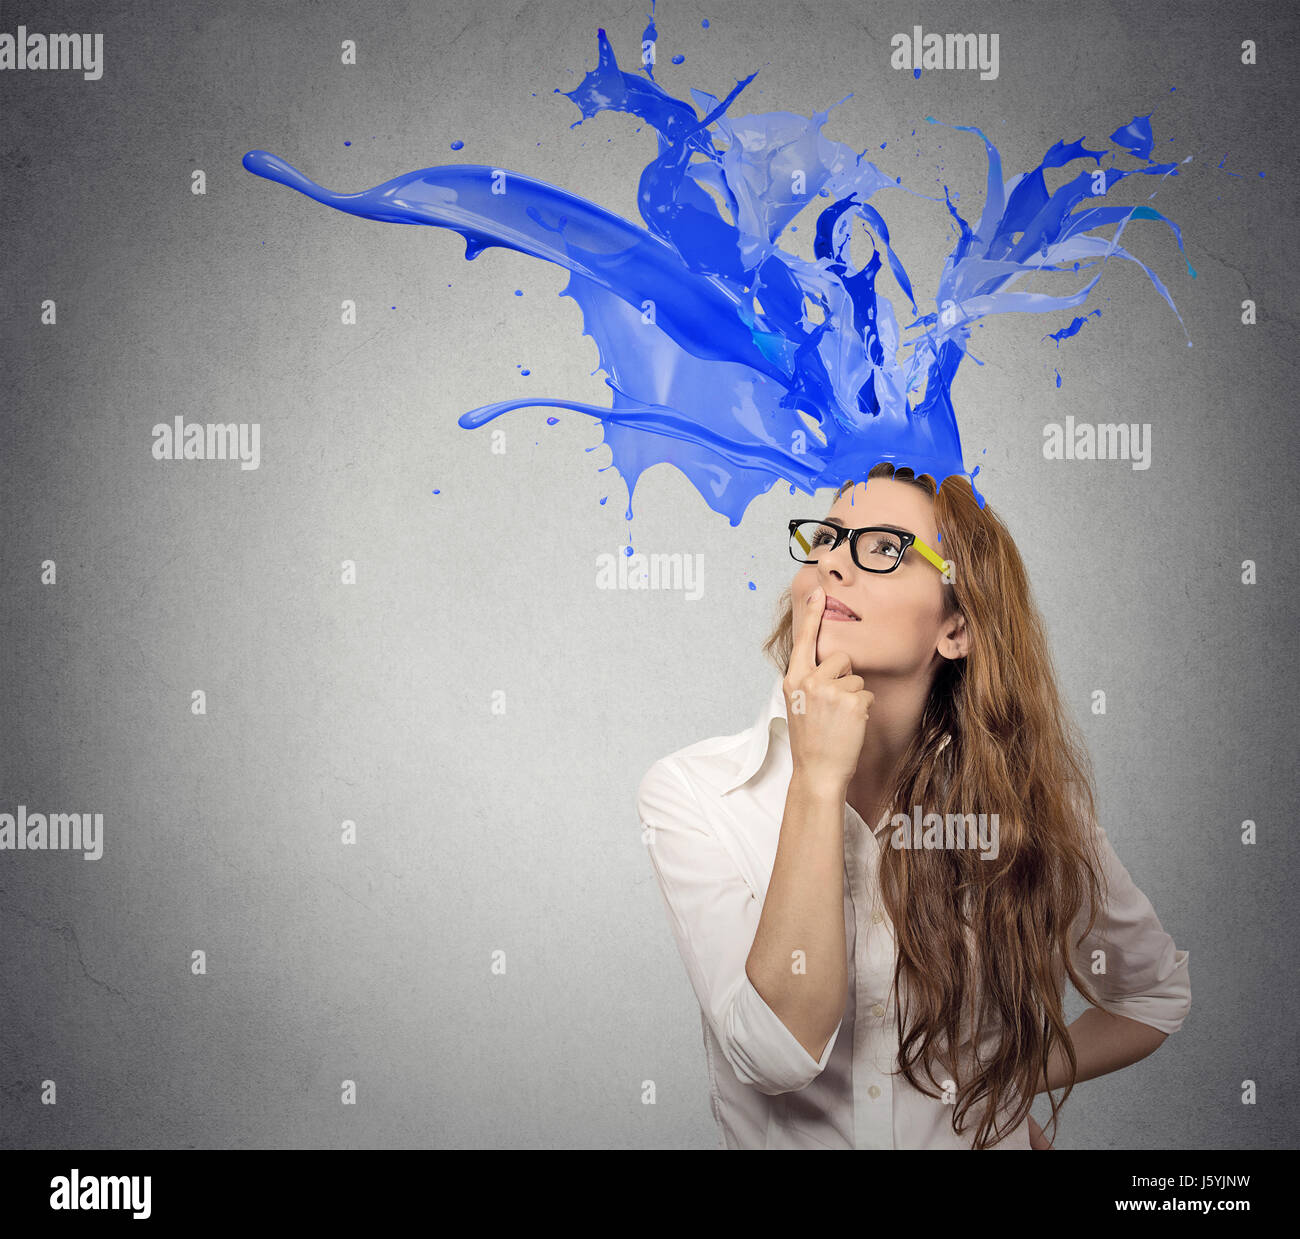 Thoughtful businesswoman looking up with colorful splashes coming out of her head isolated on gray wall background. Face expression perception Stock Photo